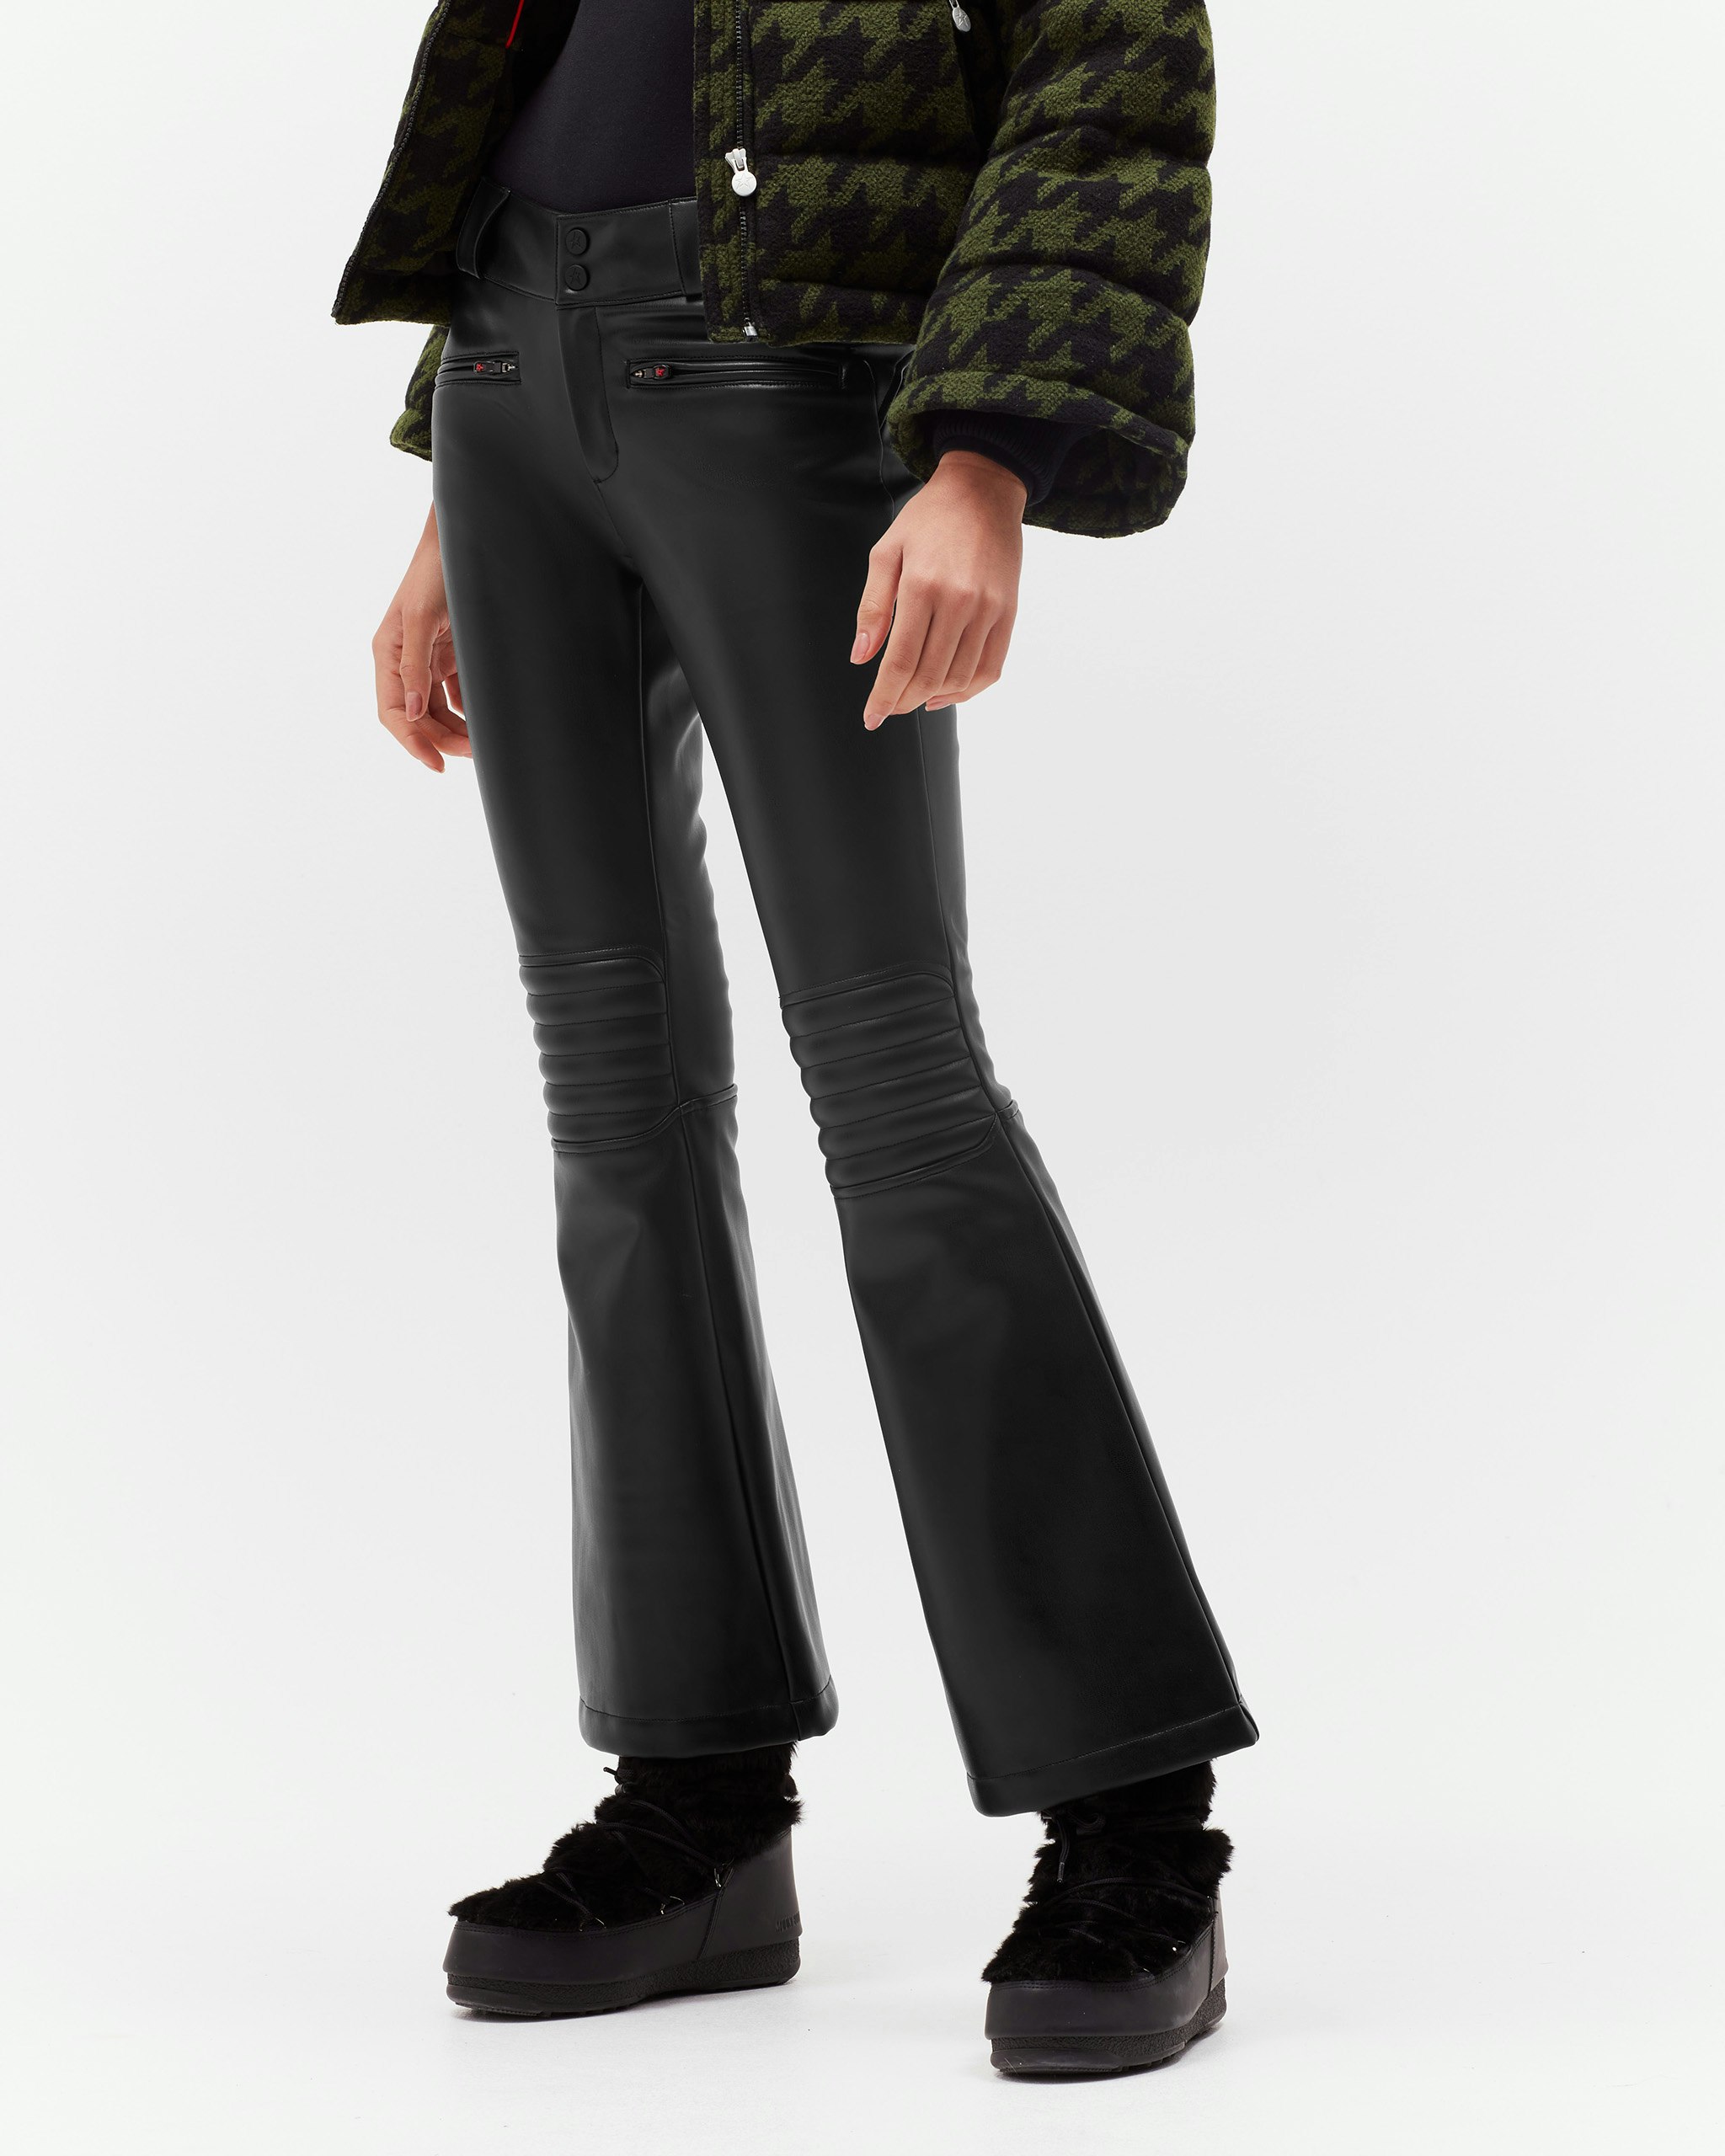 Bershka faux leather flared pants in black  Leather trousers outfit, Faux  leather jeans, Leather pants outfit